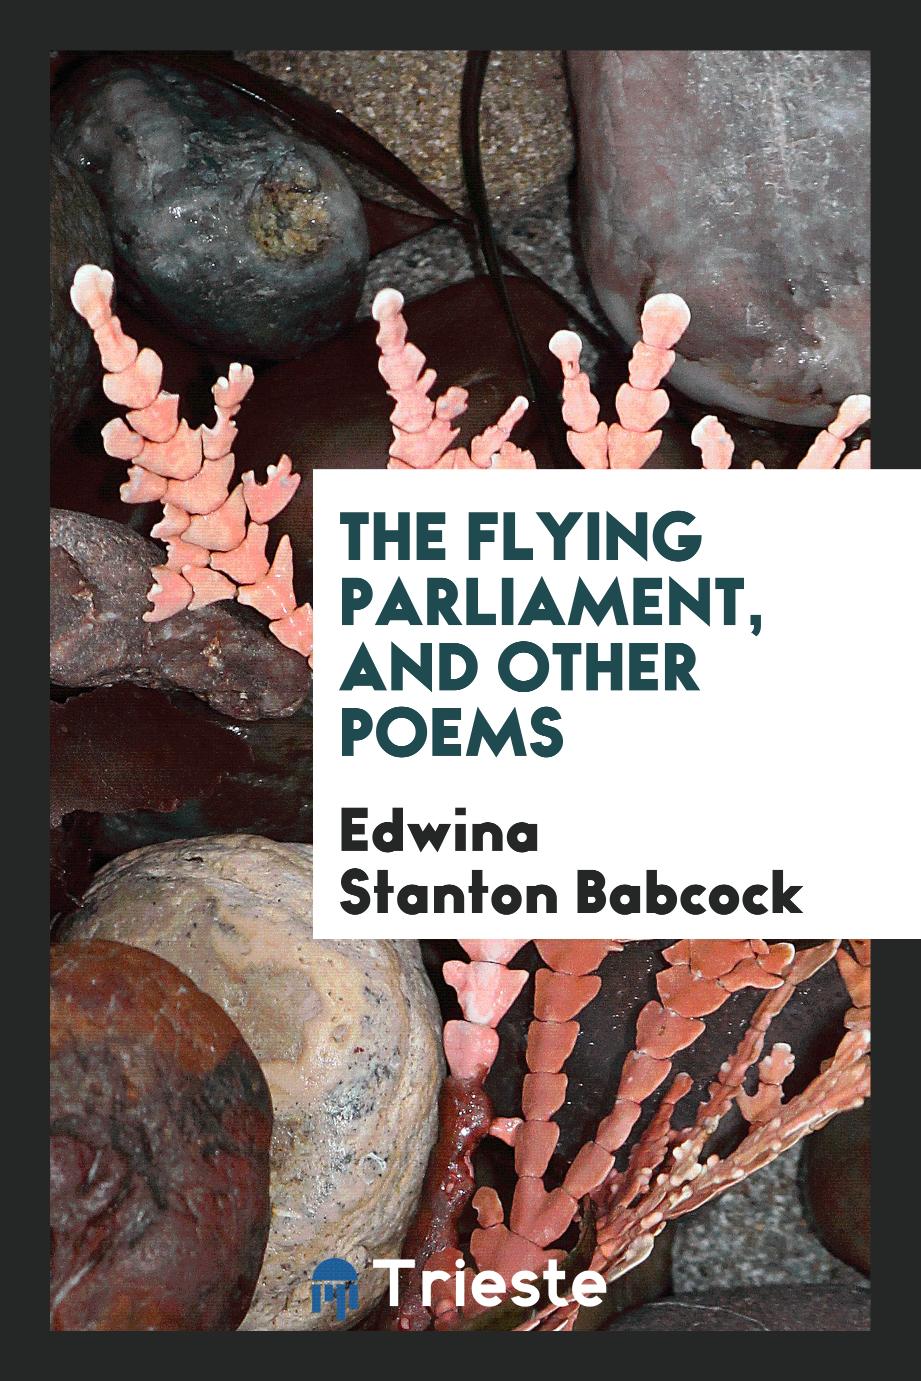 The flying parliament, and other poems